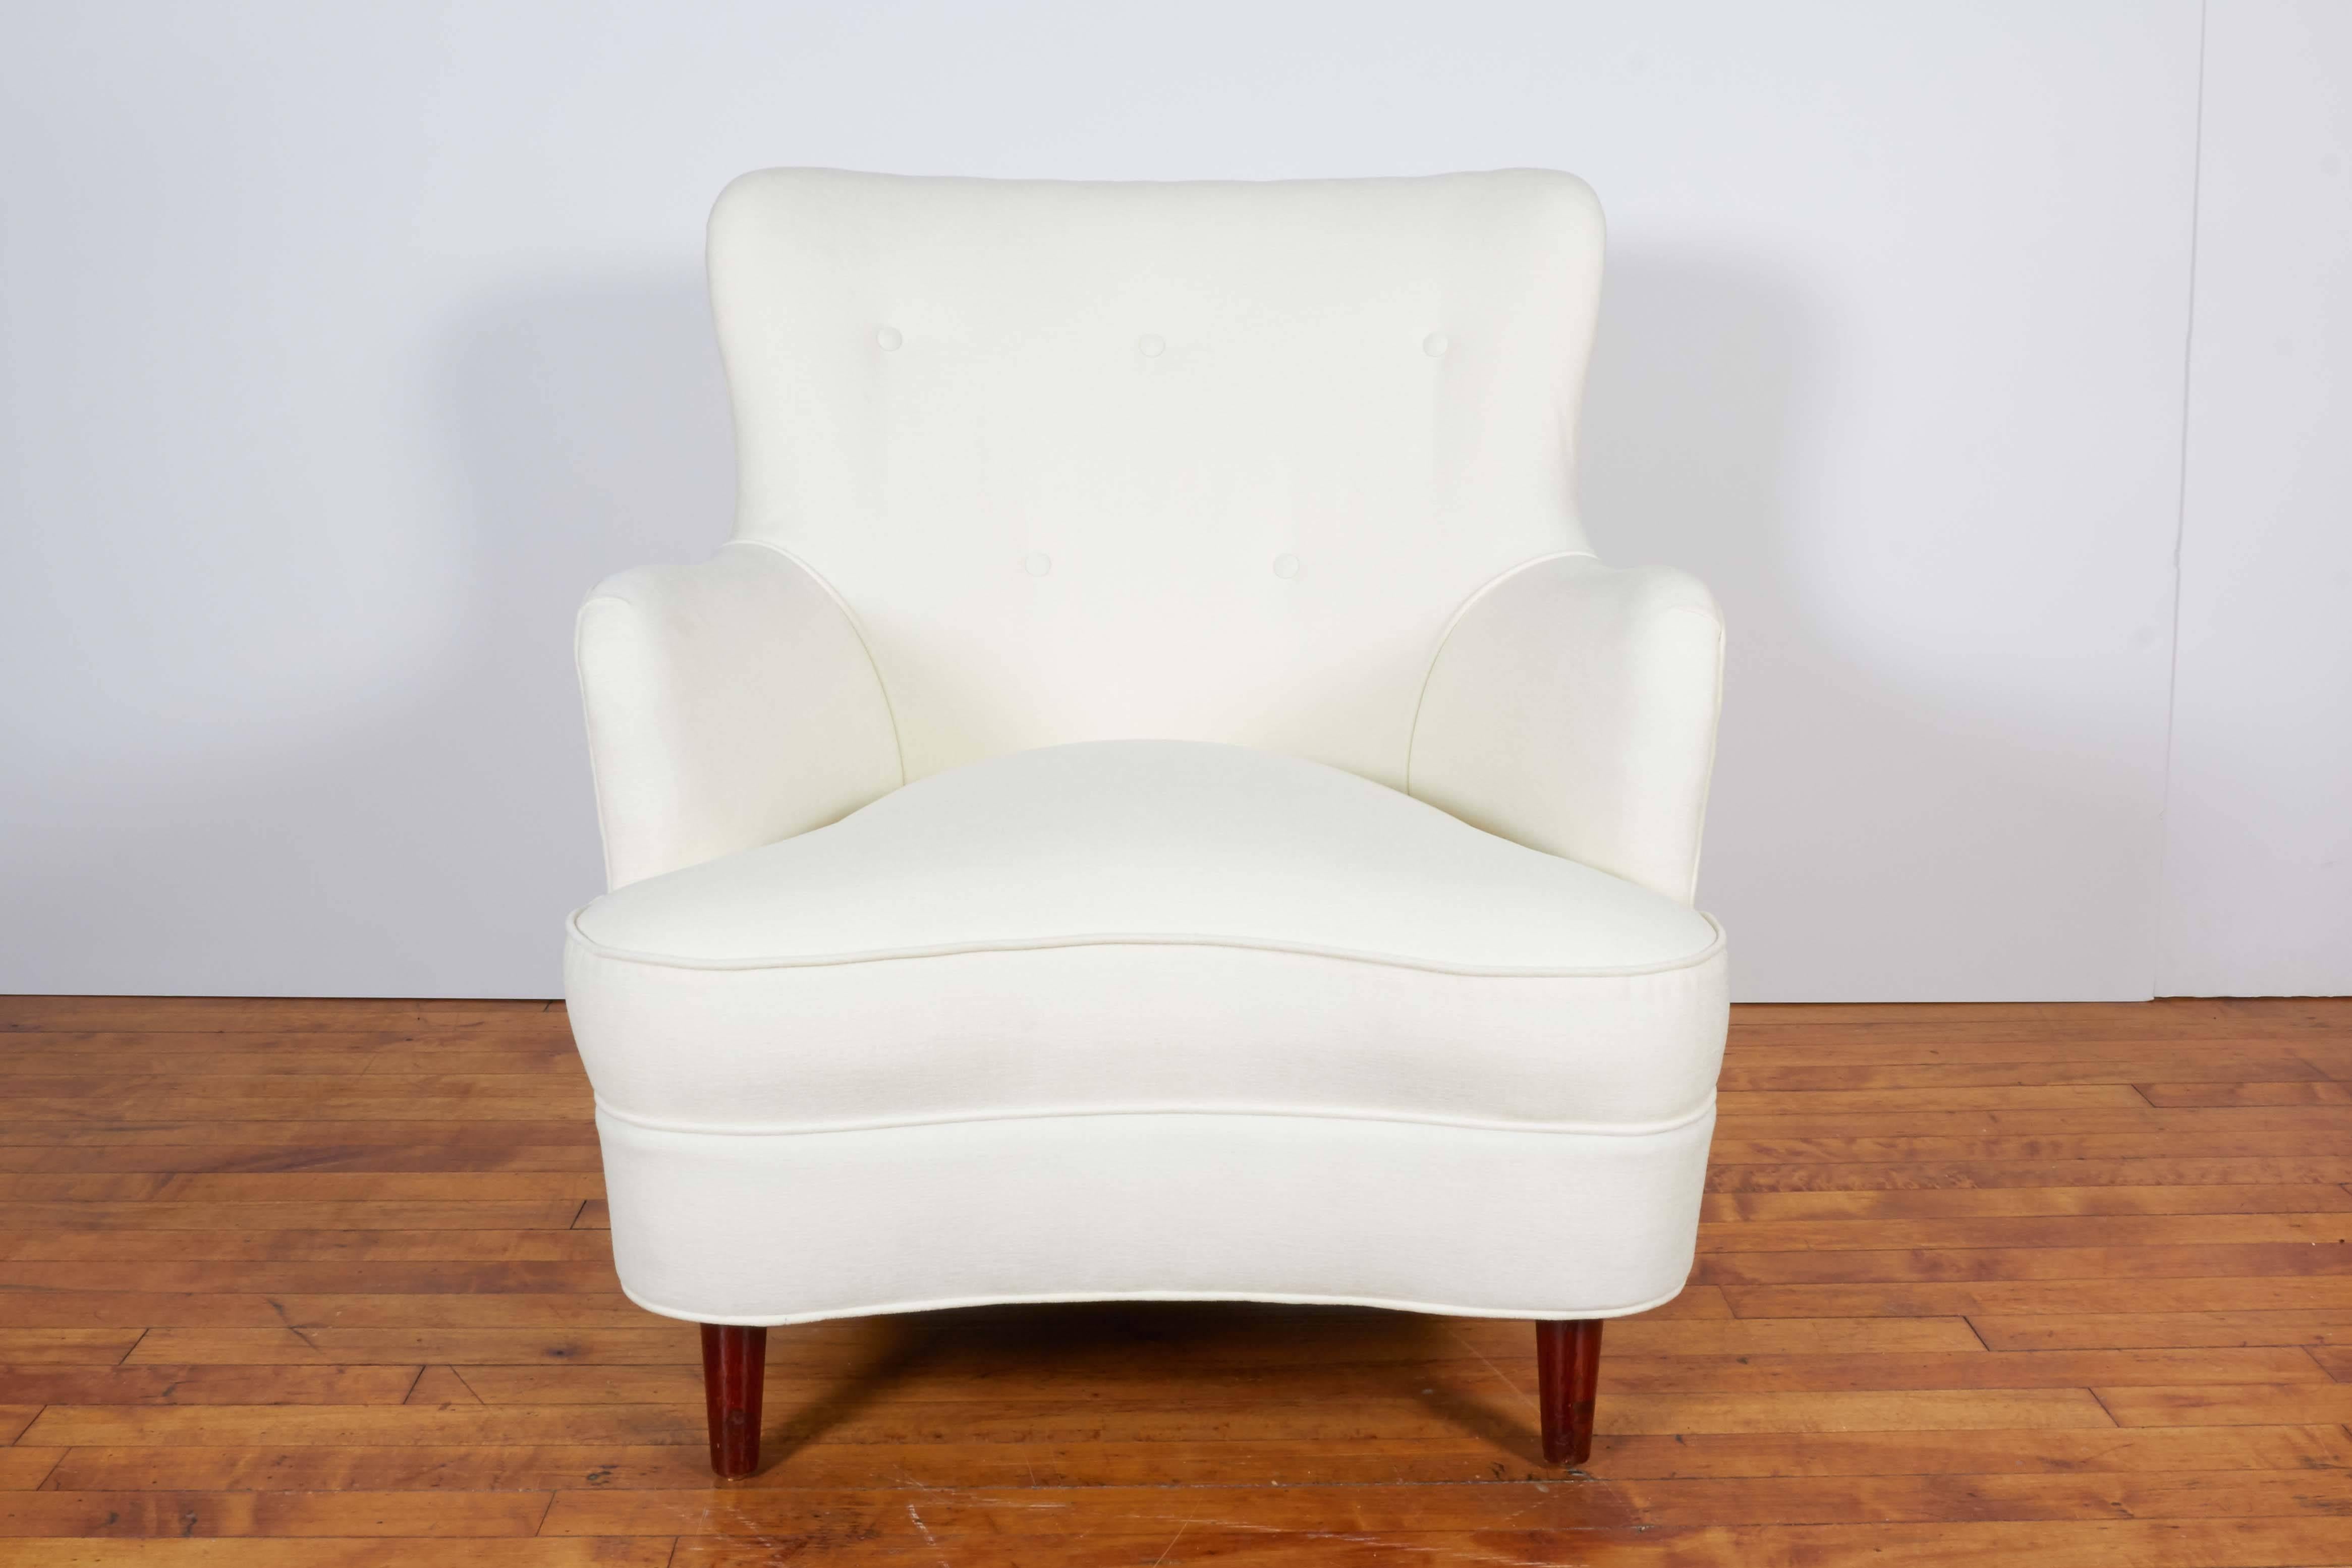 A pair of wingback armchairs, manufactured in Italy circa 1950s, each entirely upholstered in white chenille, with button tufted detail to back, on tapered wood legs. Very good vintage condition, consistent with age; newly reupholstered.